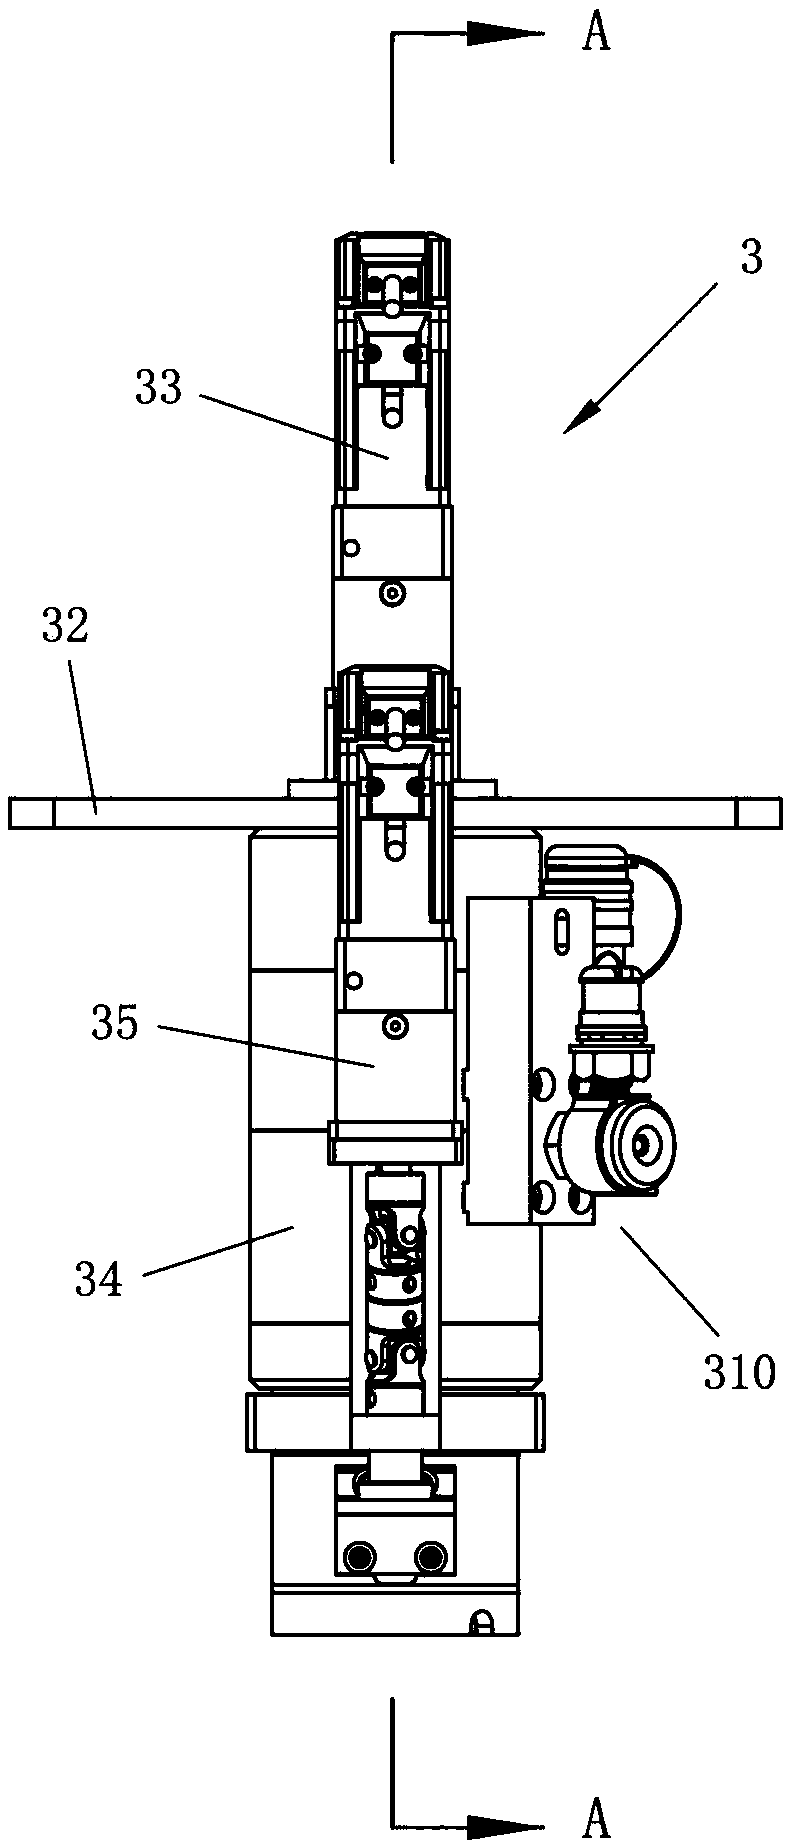 Control system for bolt fastening device